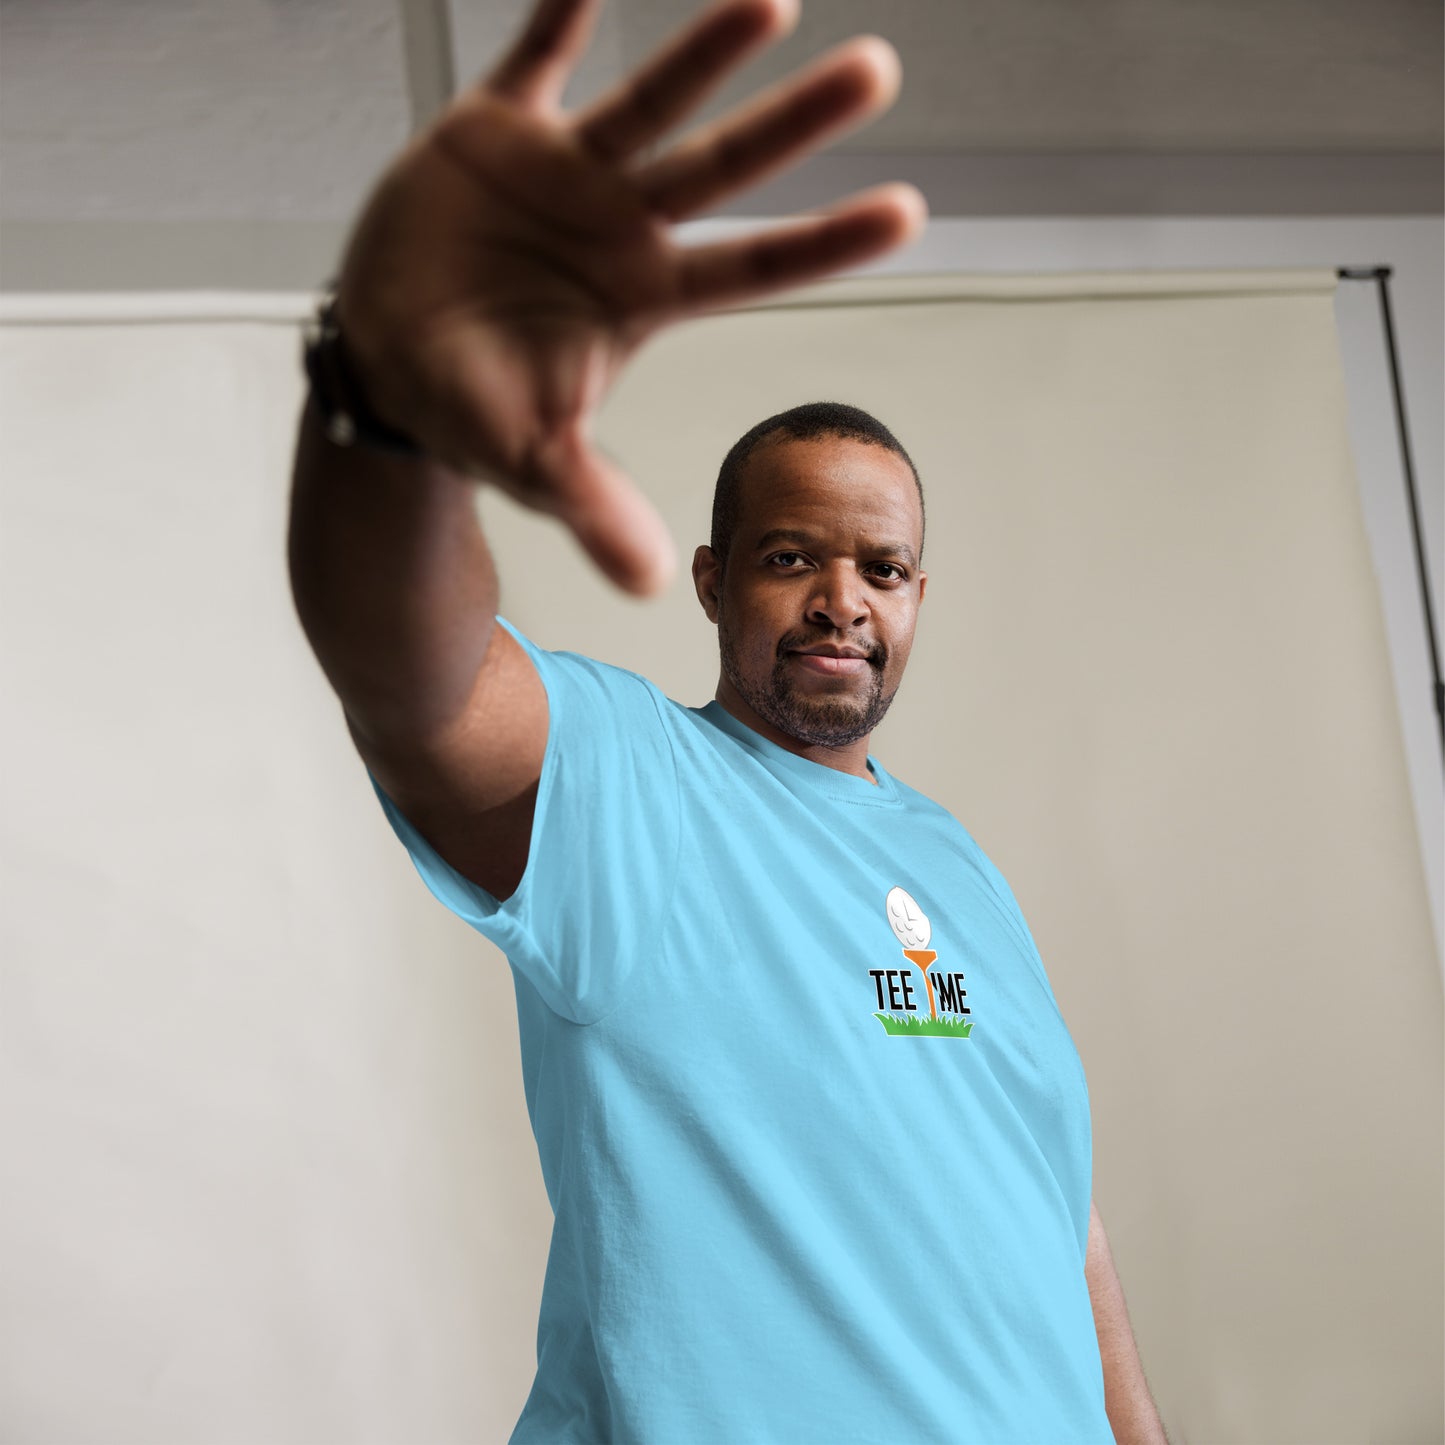 Man wearing a light blue short-sleeved t-shirt with a 'Tee Time' graphic showing a golf ball character on grass on the chest standing against a plain beige backdrop with an out stitched arm.